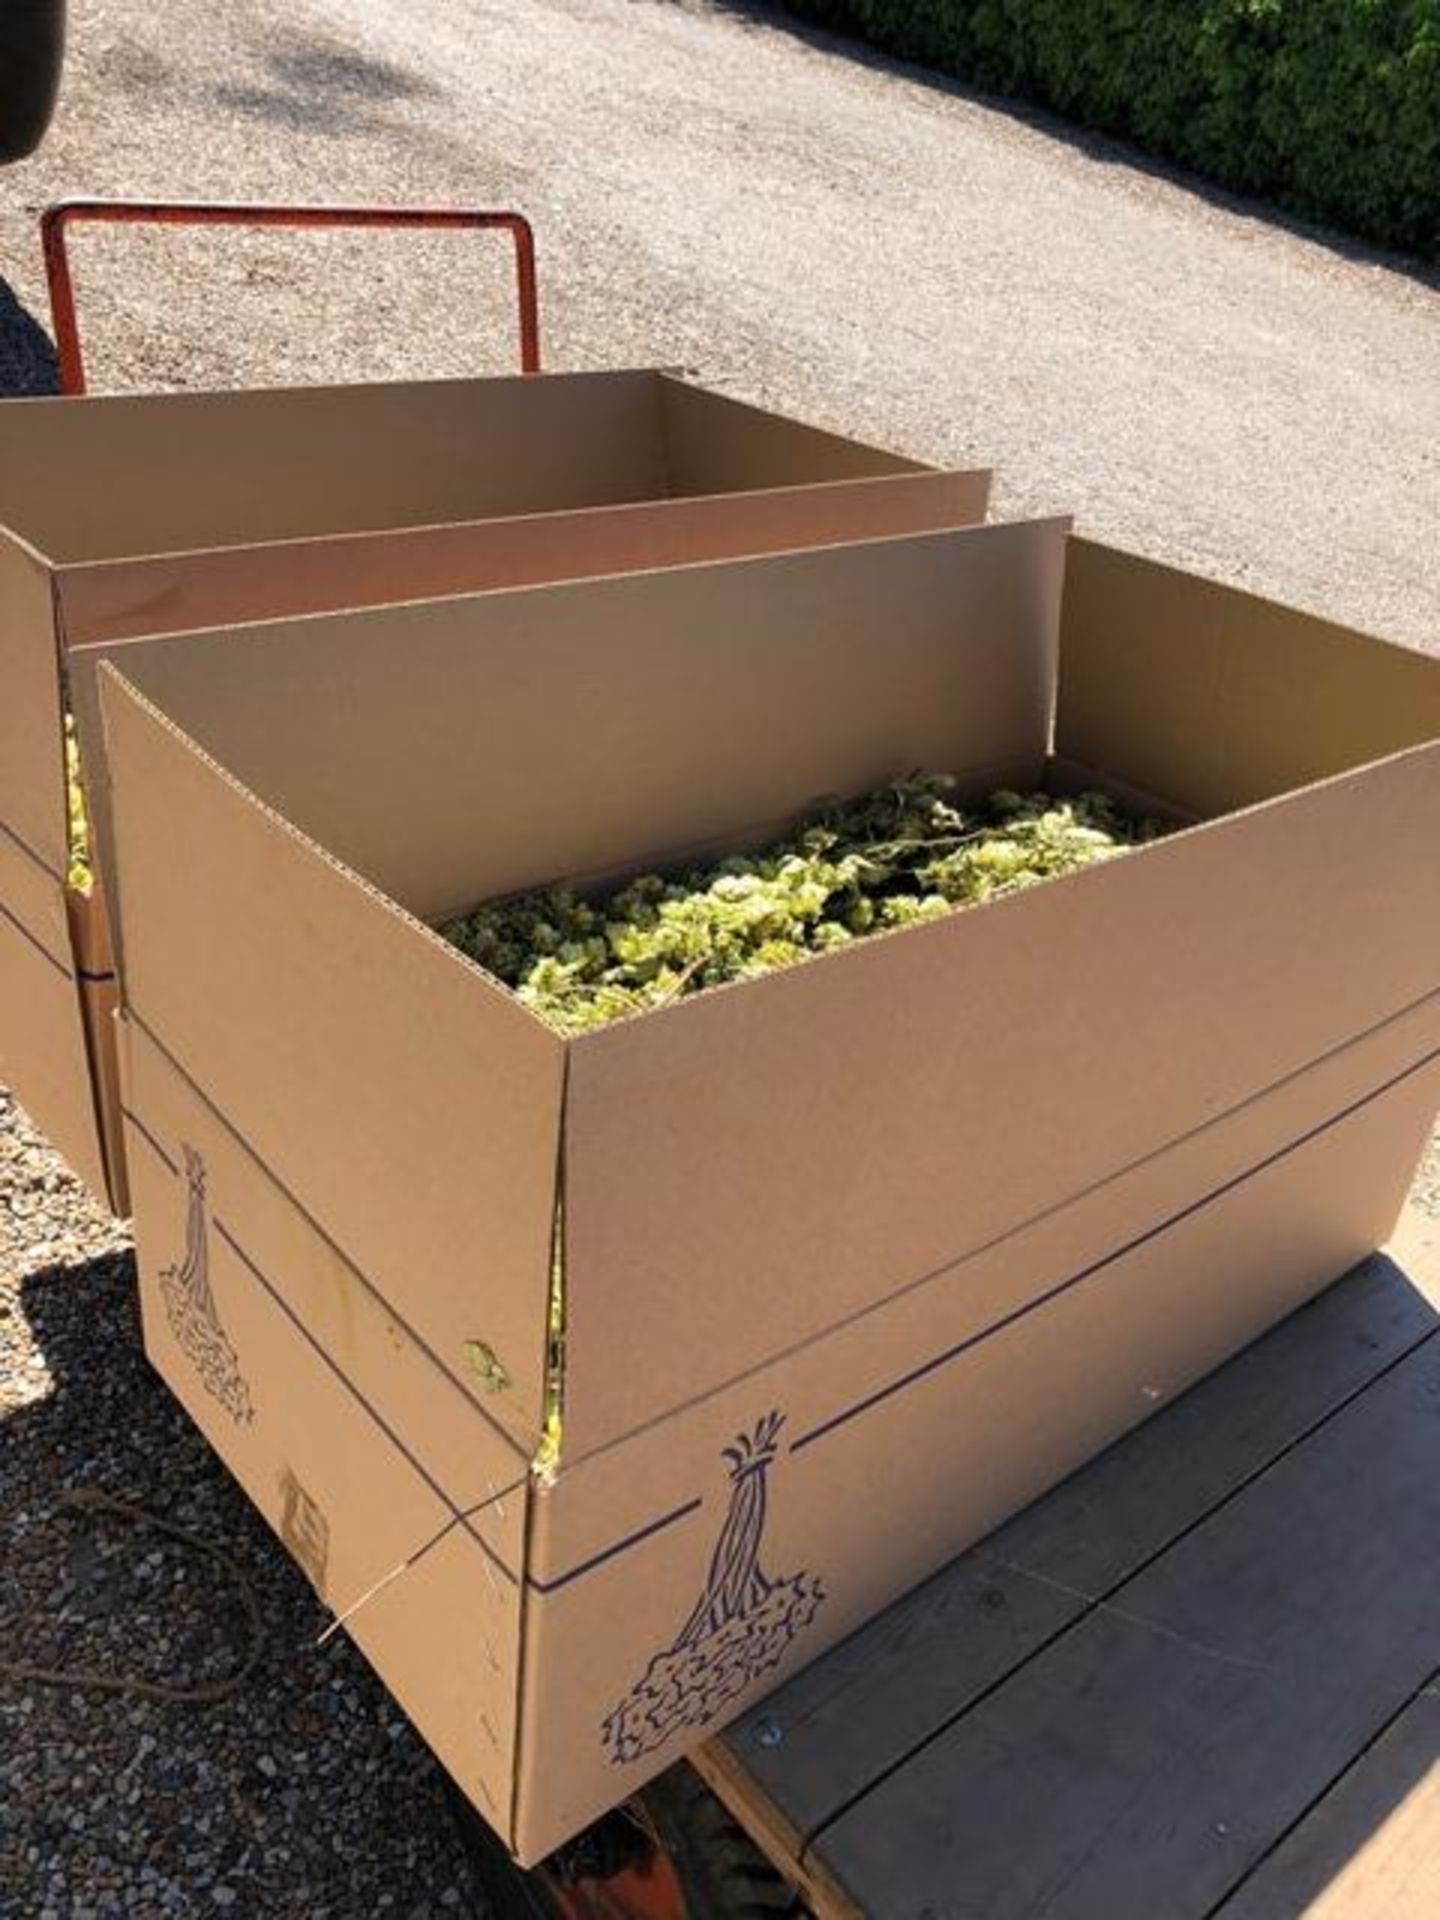 Two Boxes of The Hop Shop Dried Hop Bines (Wye Challenger RFI) Unused in original Boxes - Image 3 of 3